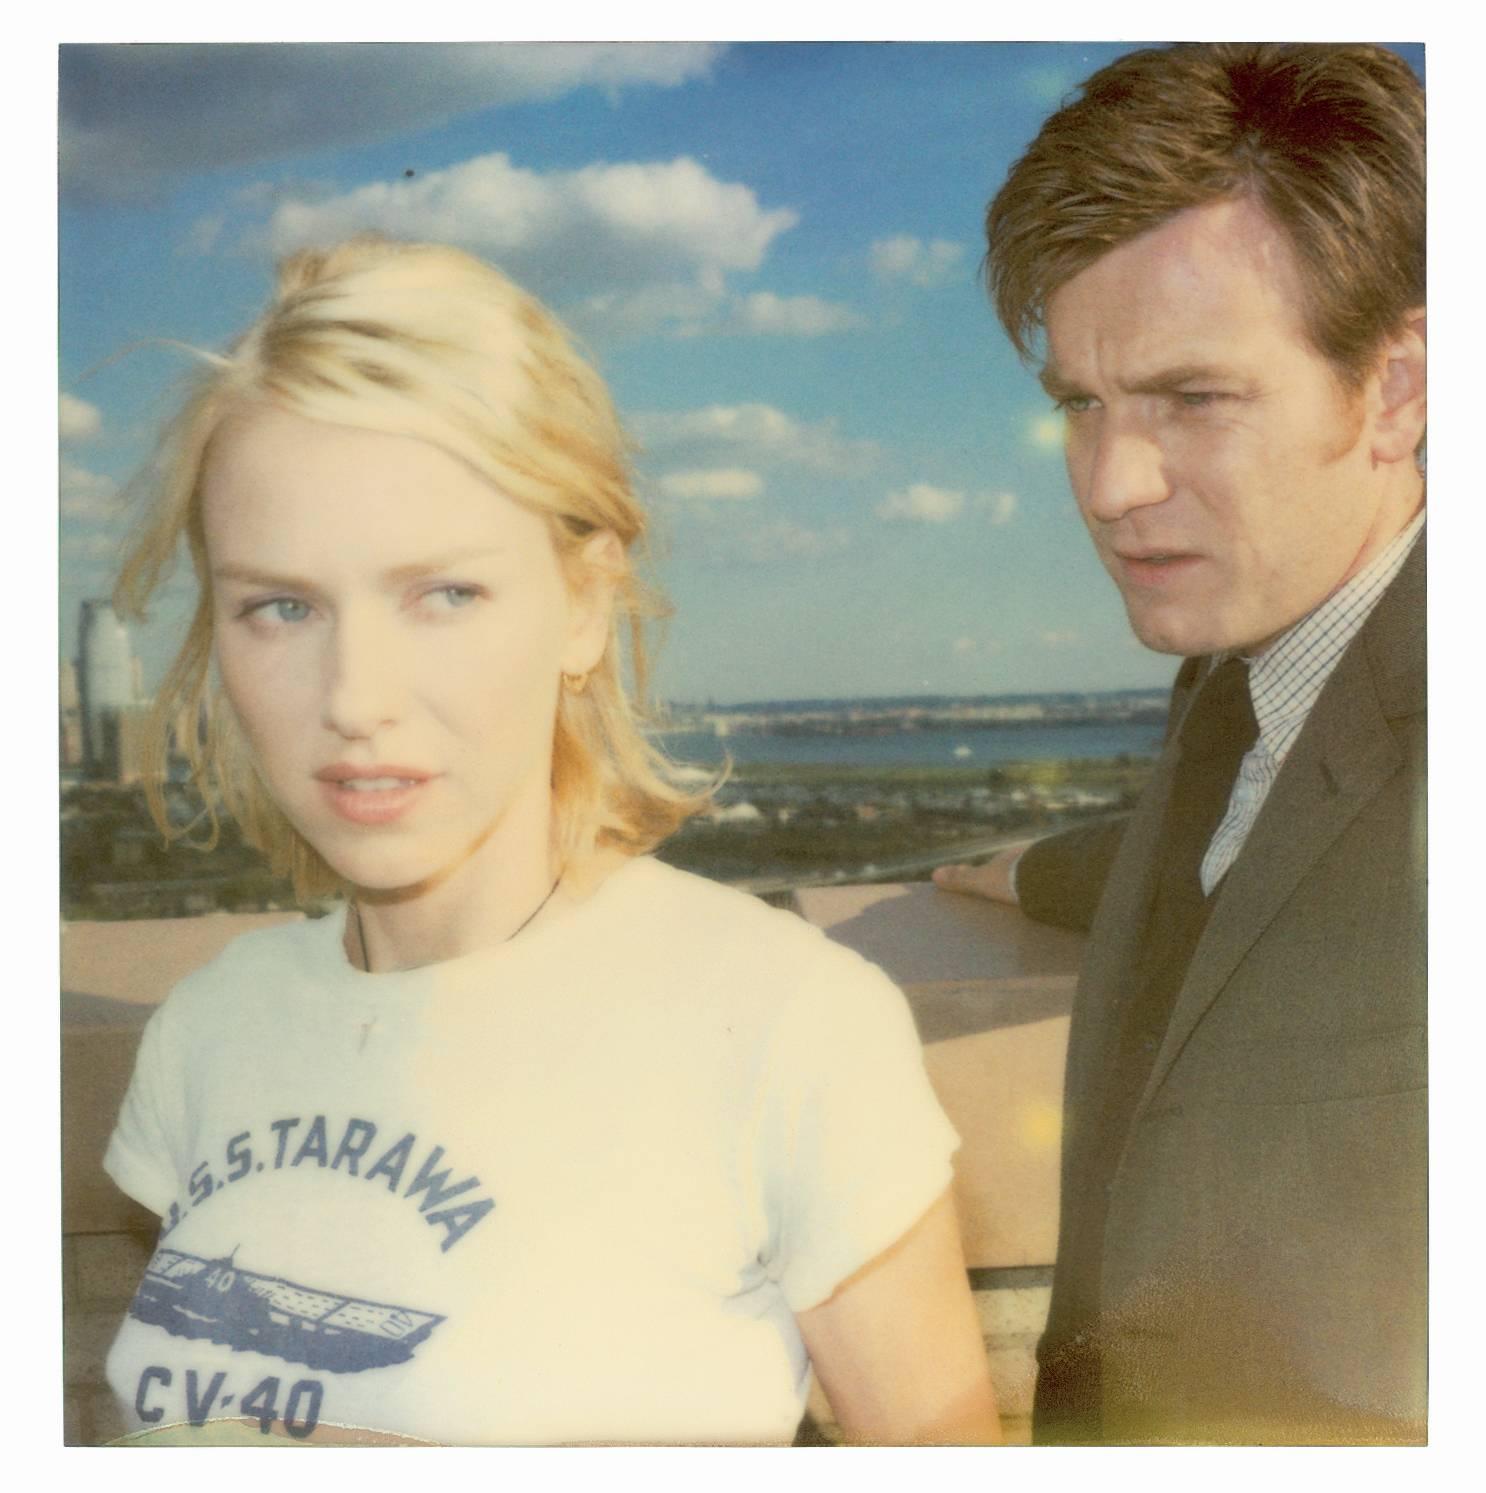 Lila and Sam from the movie Stay with Ewan McGregor, Naomi Watts - Contemporary Photograph by Stefanie Schneider